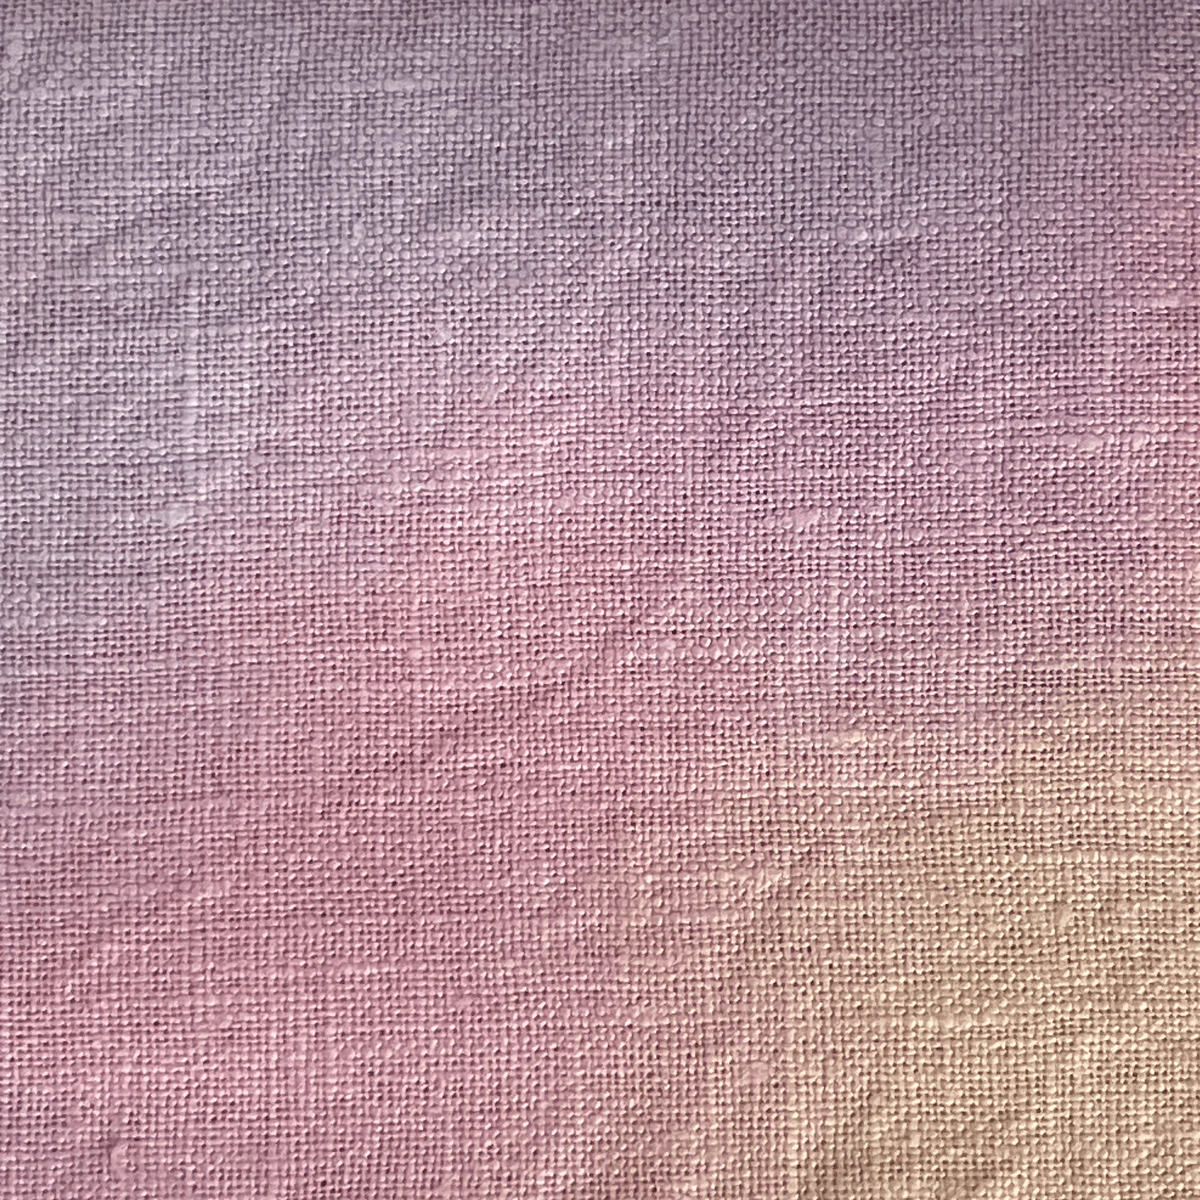 www.colourstreams.com.au Colour Streams Linen 36 Count Hand Dyed Dawn DL 12 Yellows Purples Pinks Embroidery Cross Stitch Textile Arts FIbre Embroidery Slow Stitching Counted Meditative Australia